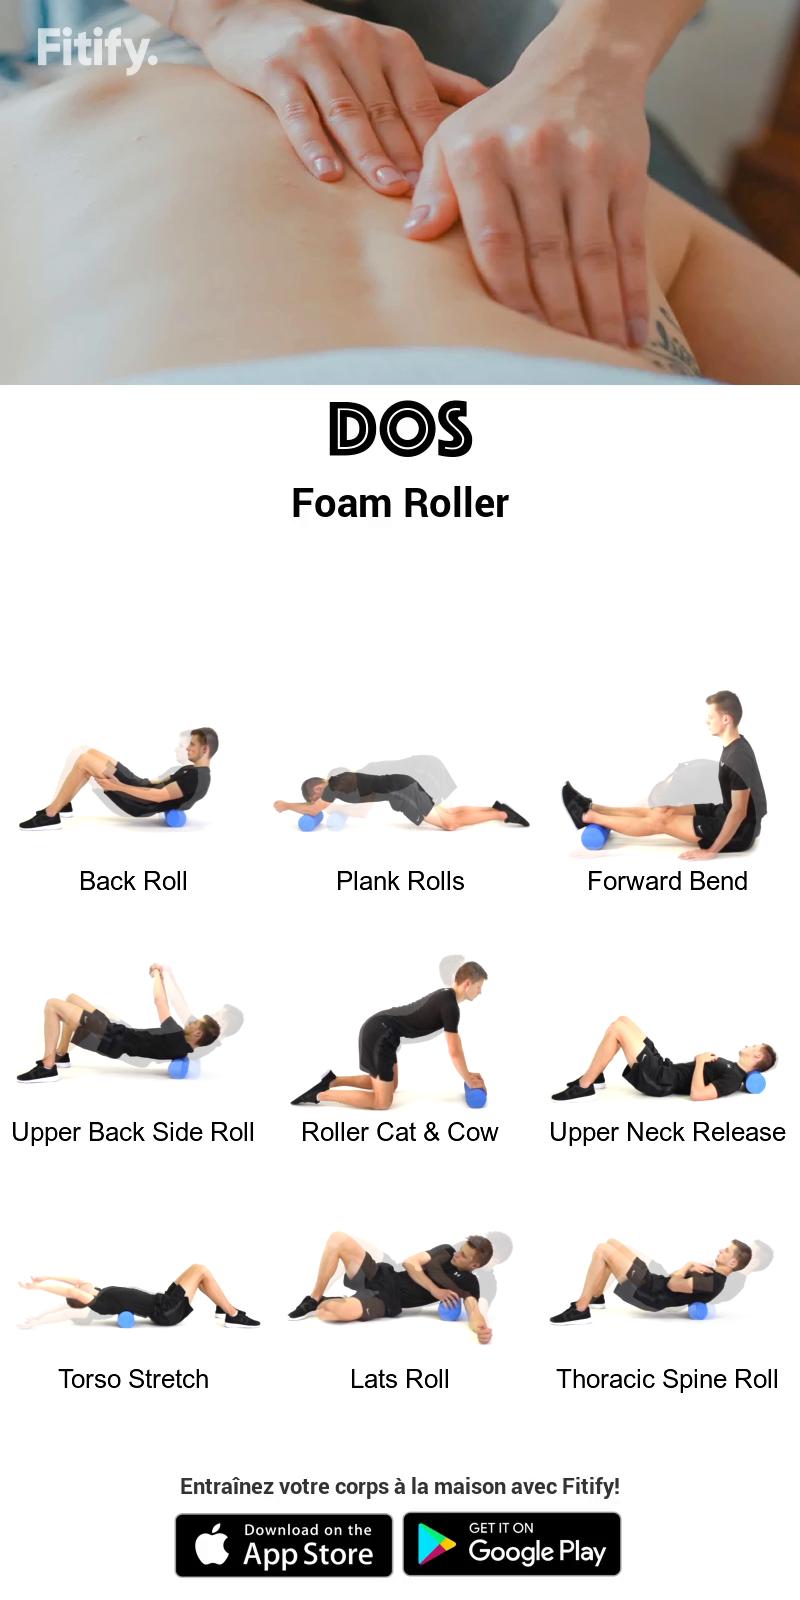 Transform Your Body in Just Minutes a Day with a 24" Foam Roller: The Complete Guide